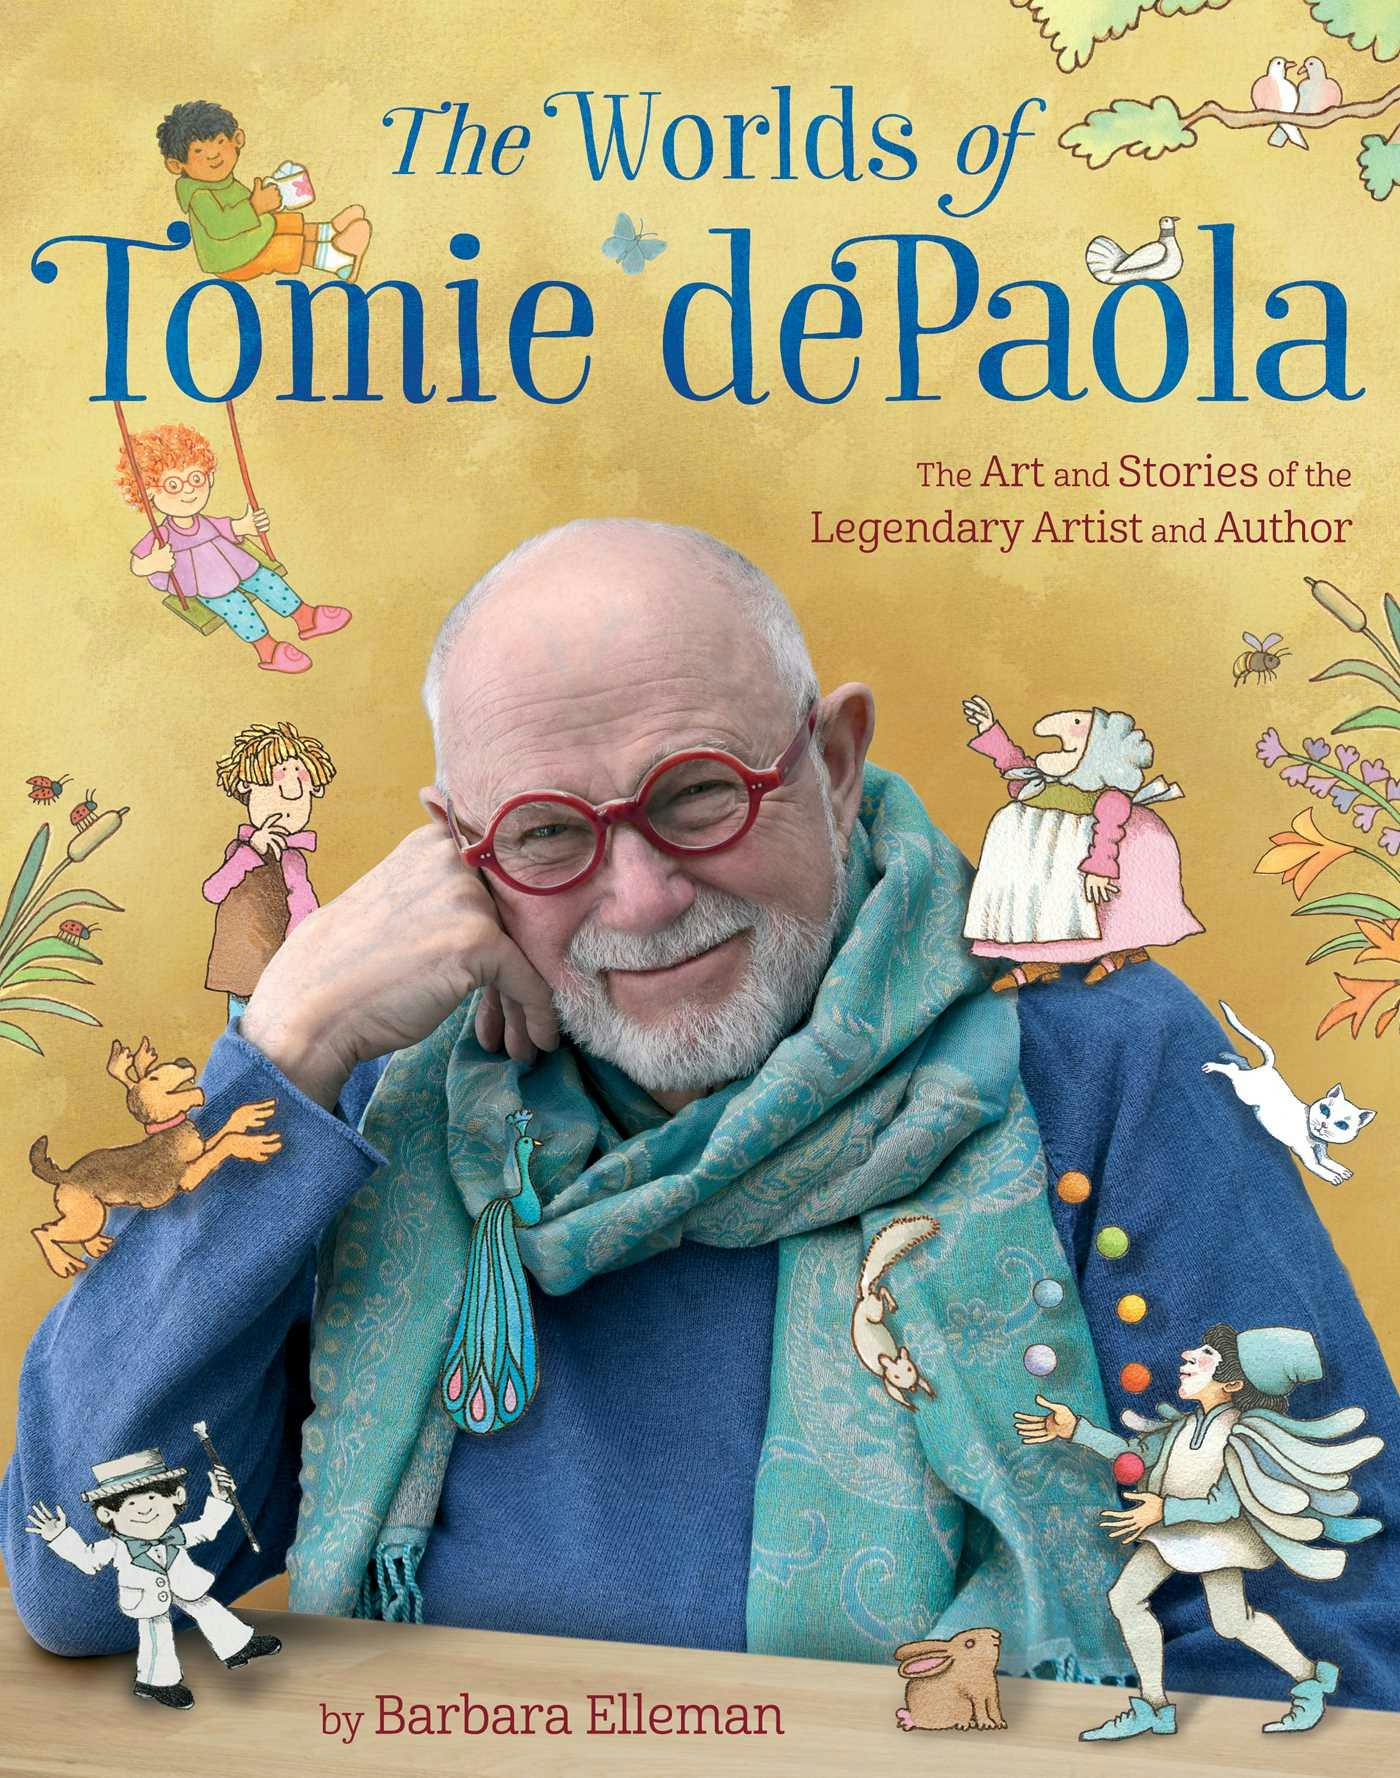 The Worlds of Tomie dePaola: The Art and Stories of the Legendary Artist and Author - Barbara Elleman